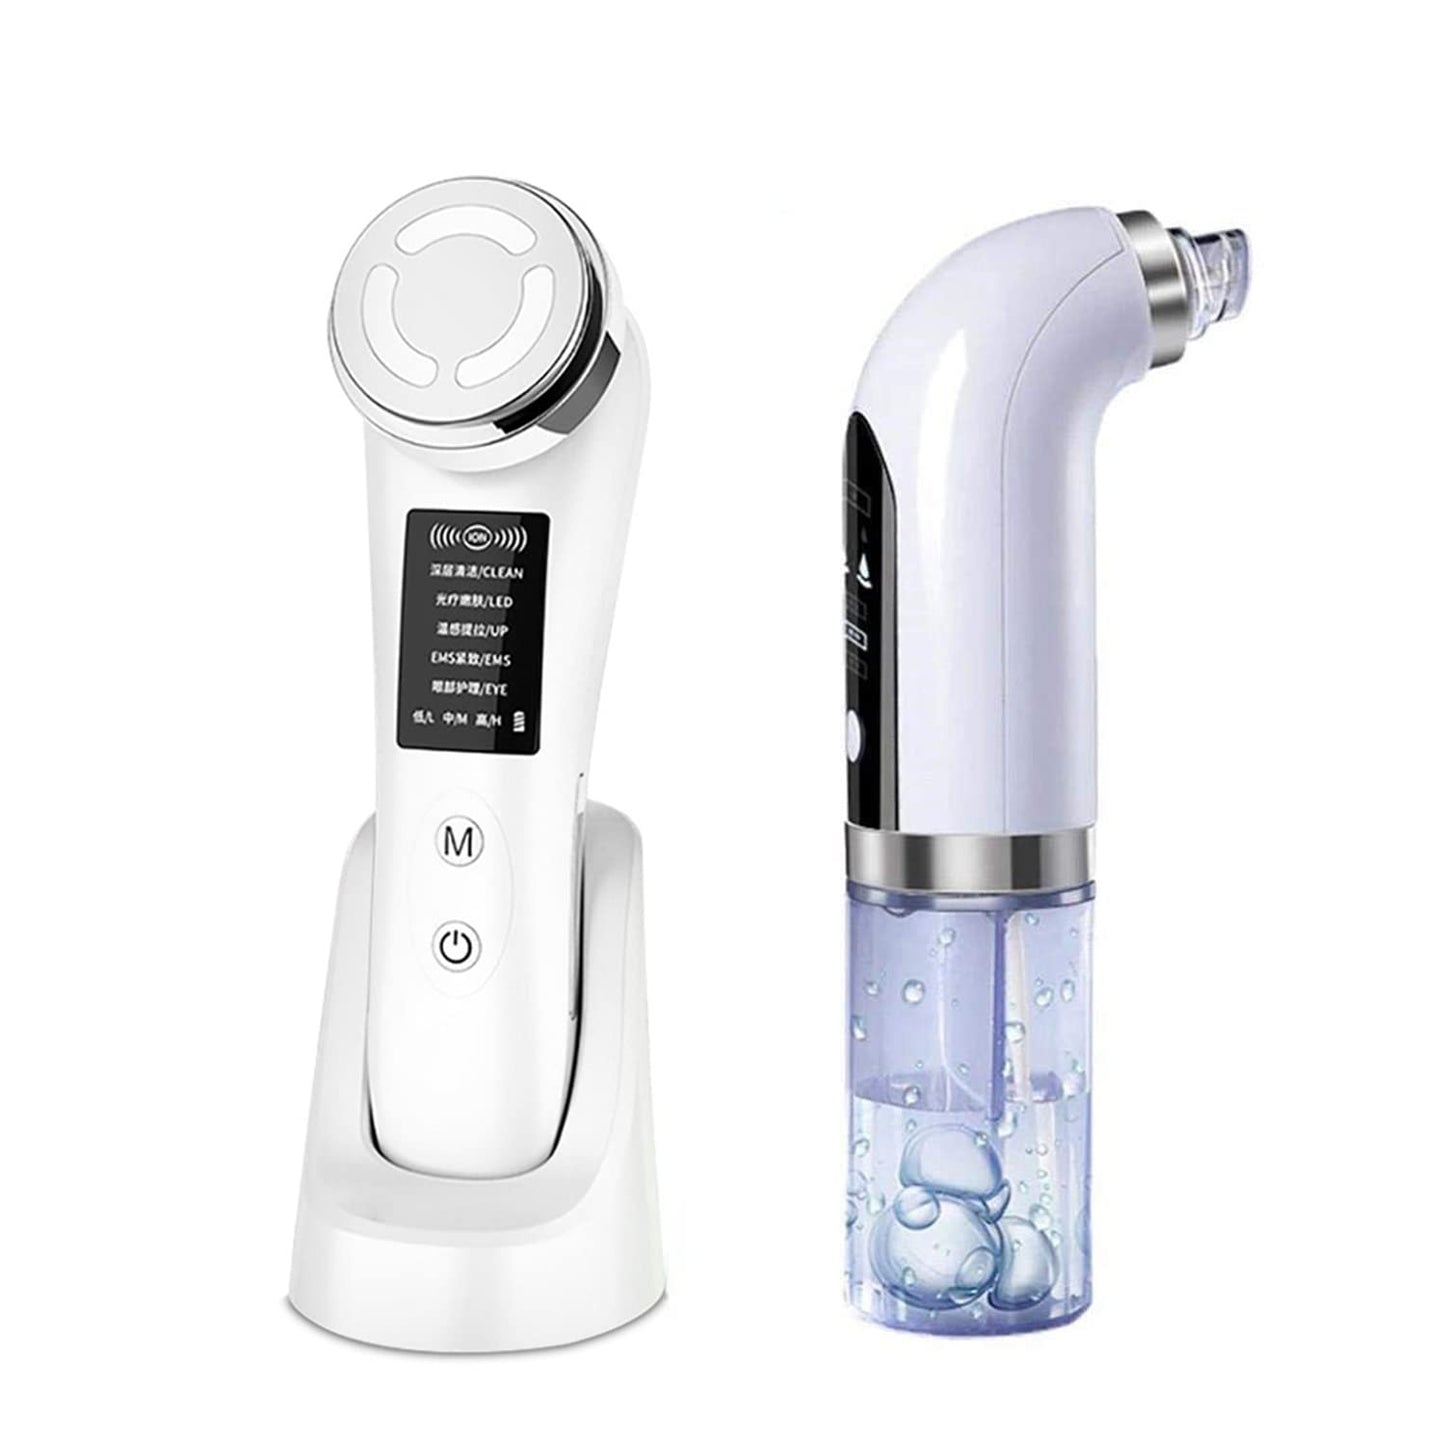 HICITI 5 in 1 EMS Face Lift Devices Microcurrent Skin Rejuvenation Facial Massager Light Therapy Anti Aging Wrinkle And Bubble Blackhead Remover Pore Acne Removal Vacuum Suction Comedo